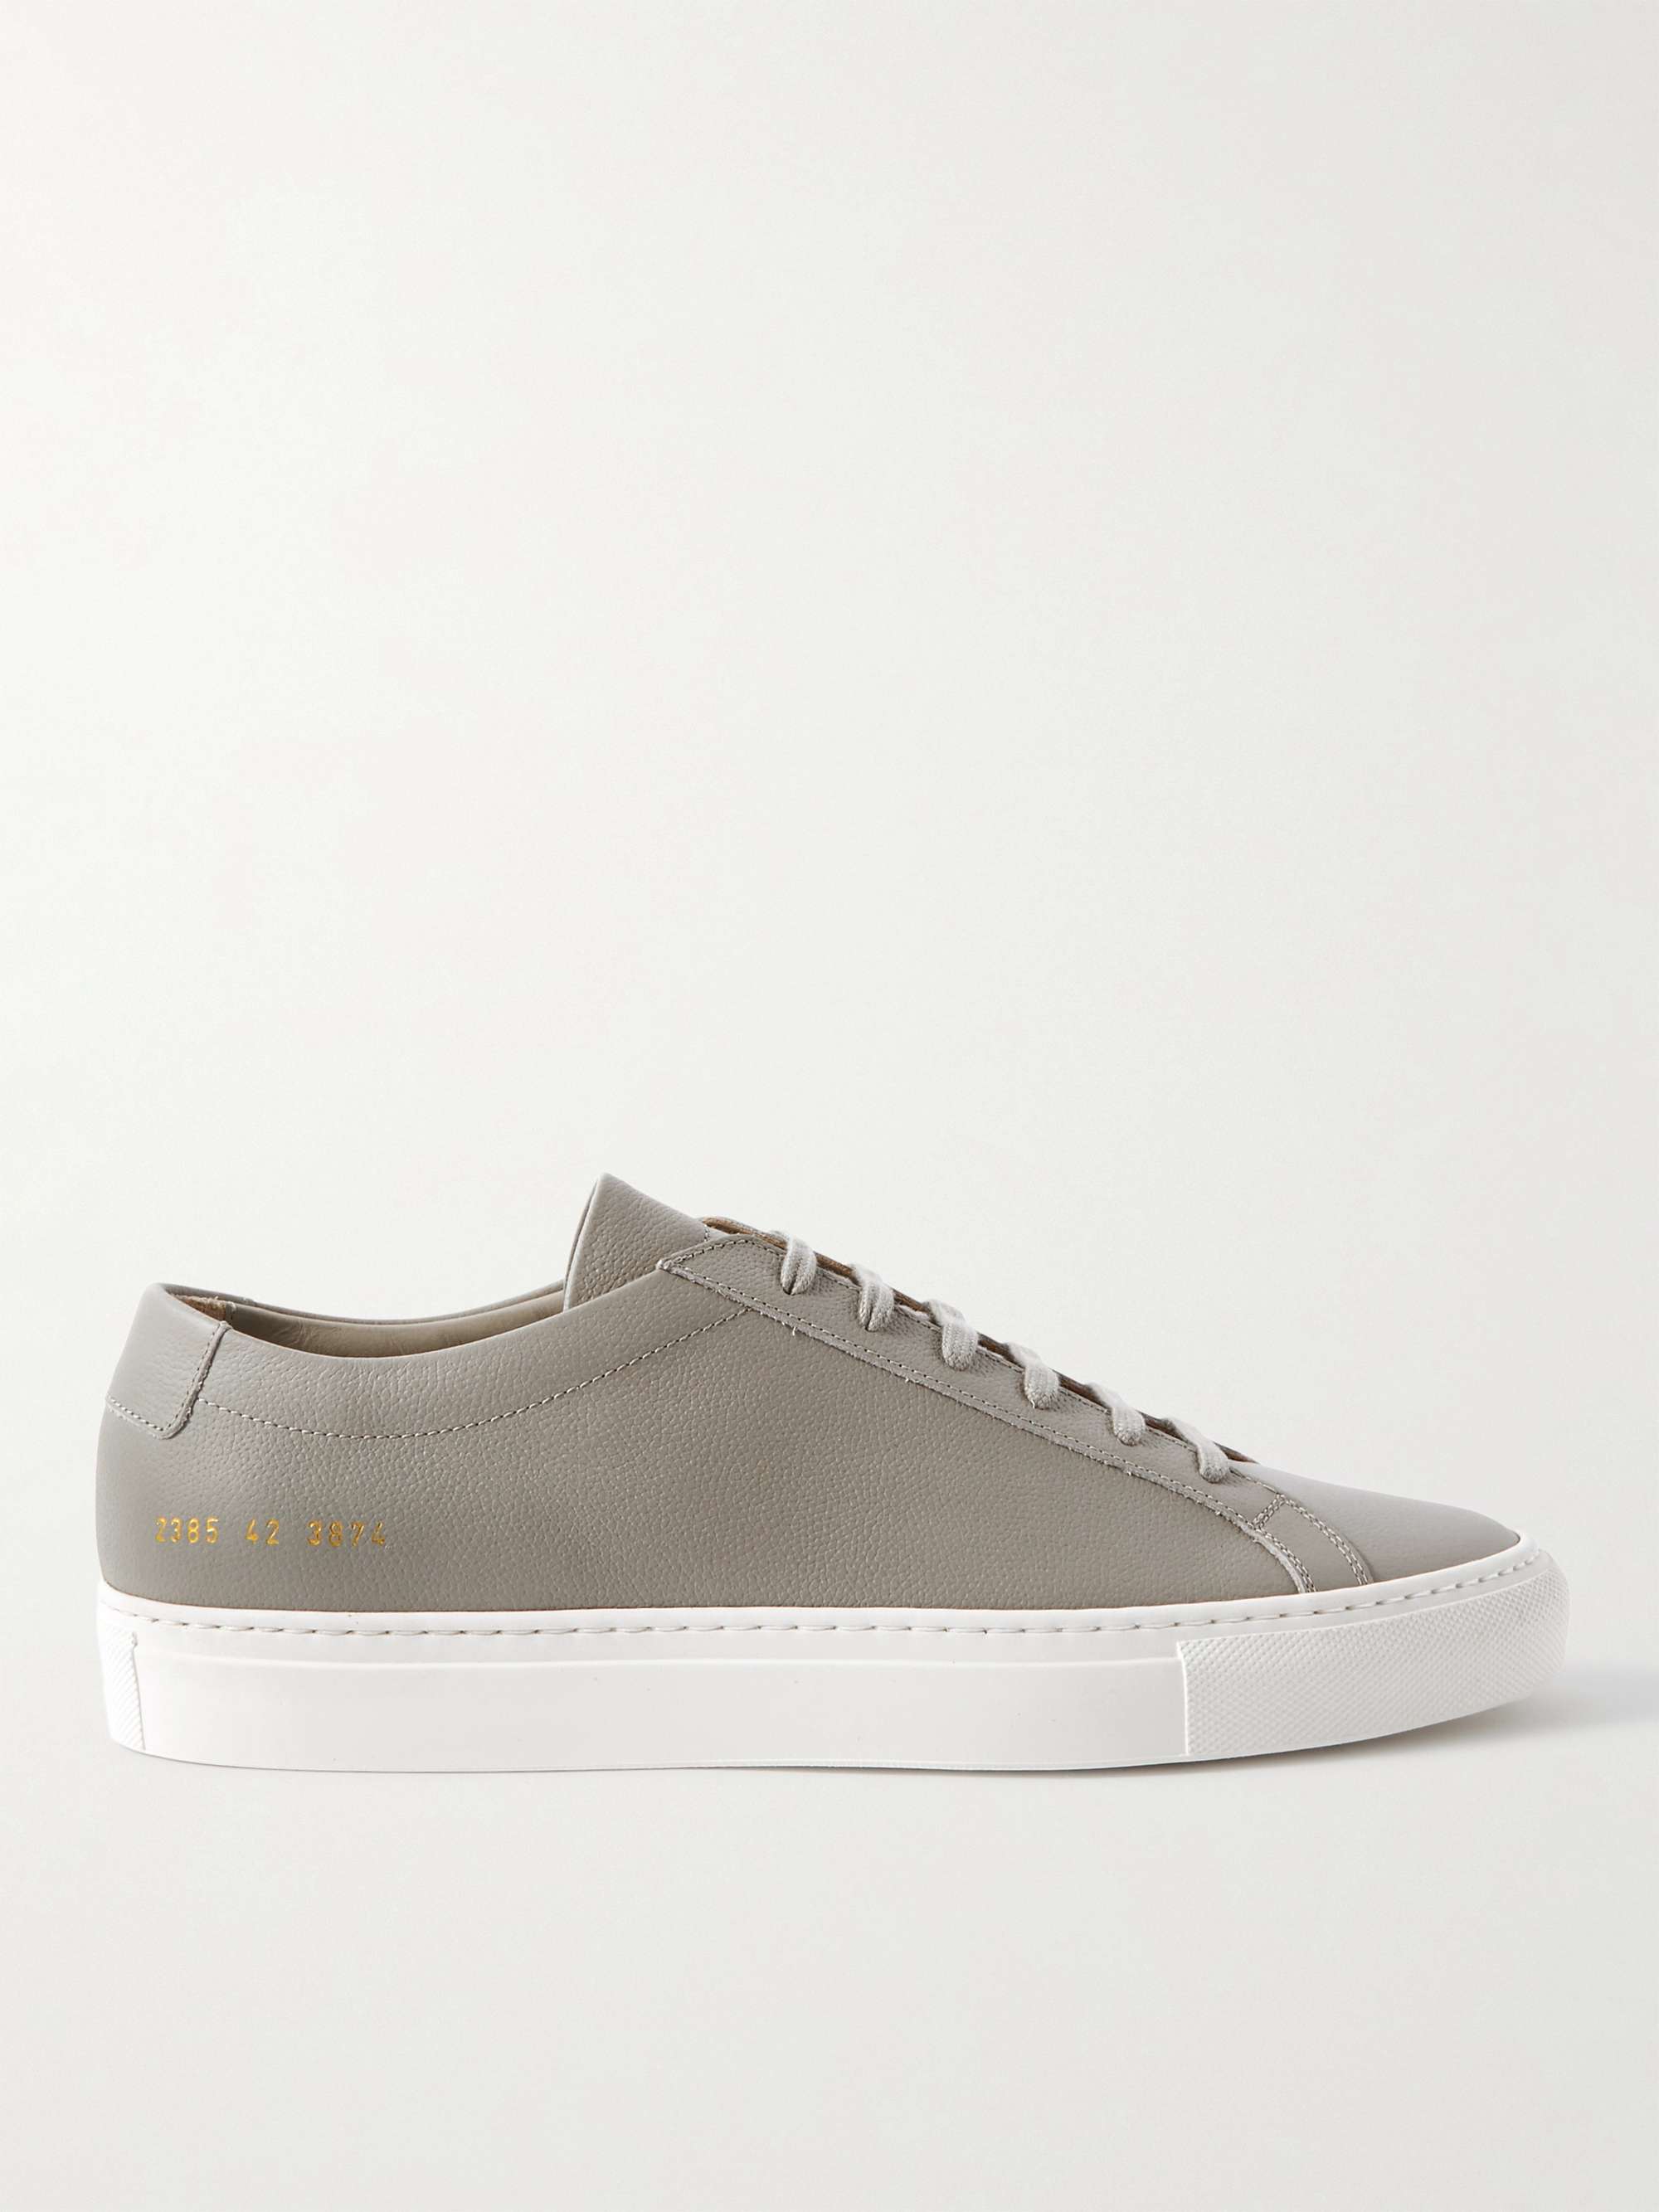 COMMON PROJECTS Original Achilles Leather Sneakers for Men | MR PORTER